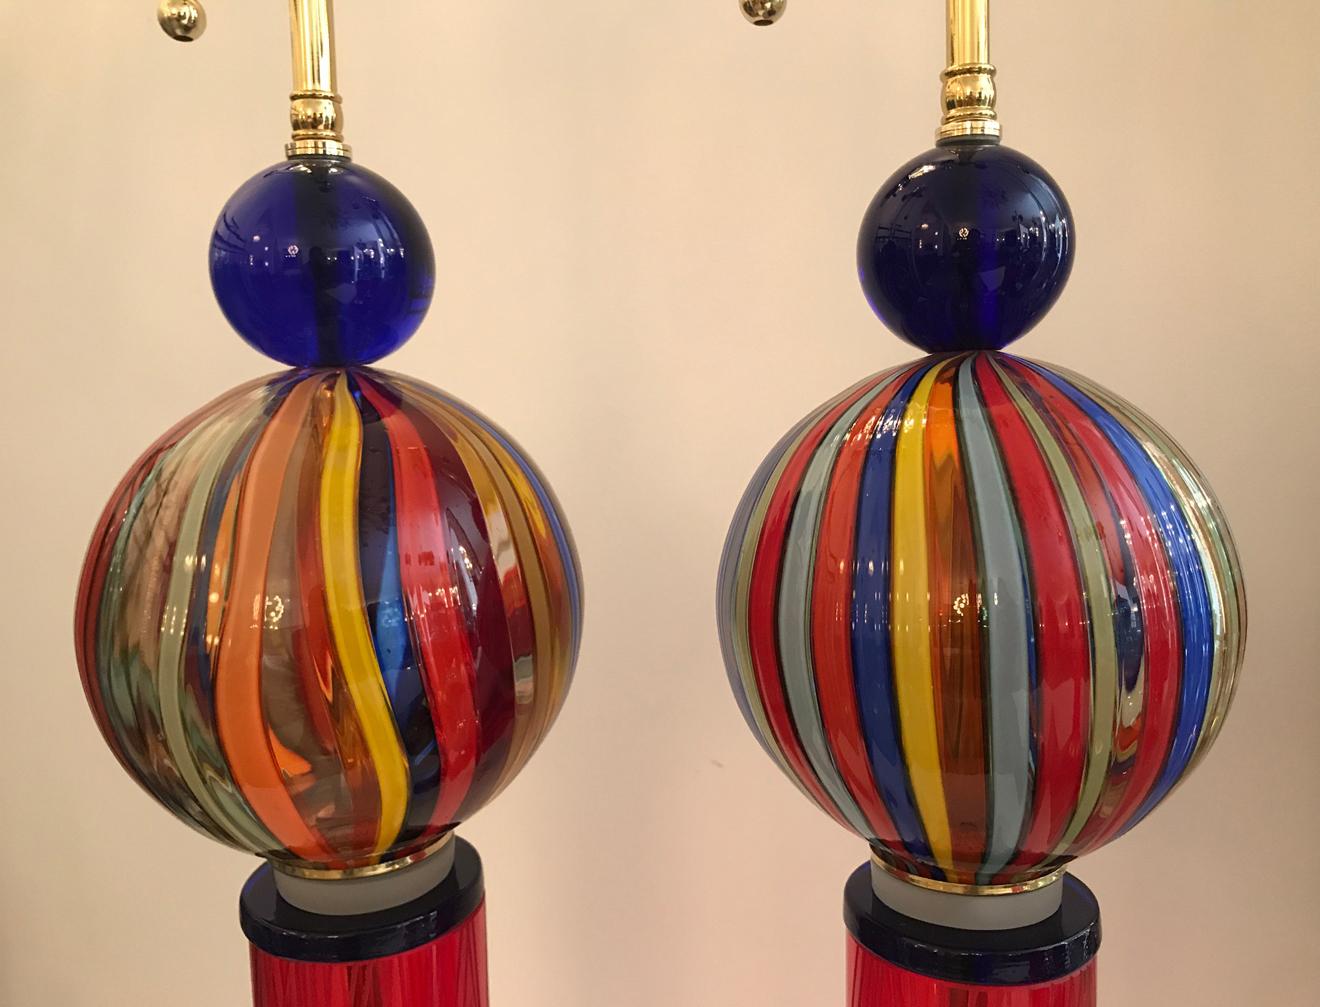 One of a kind Murano glass all around table lamps. Featuring a Cenedese (canne) glass ball as a main element. Newly wired and adapted with brass double sockets and silk cord.